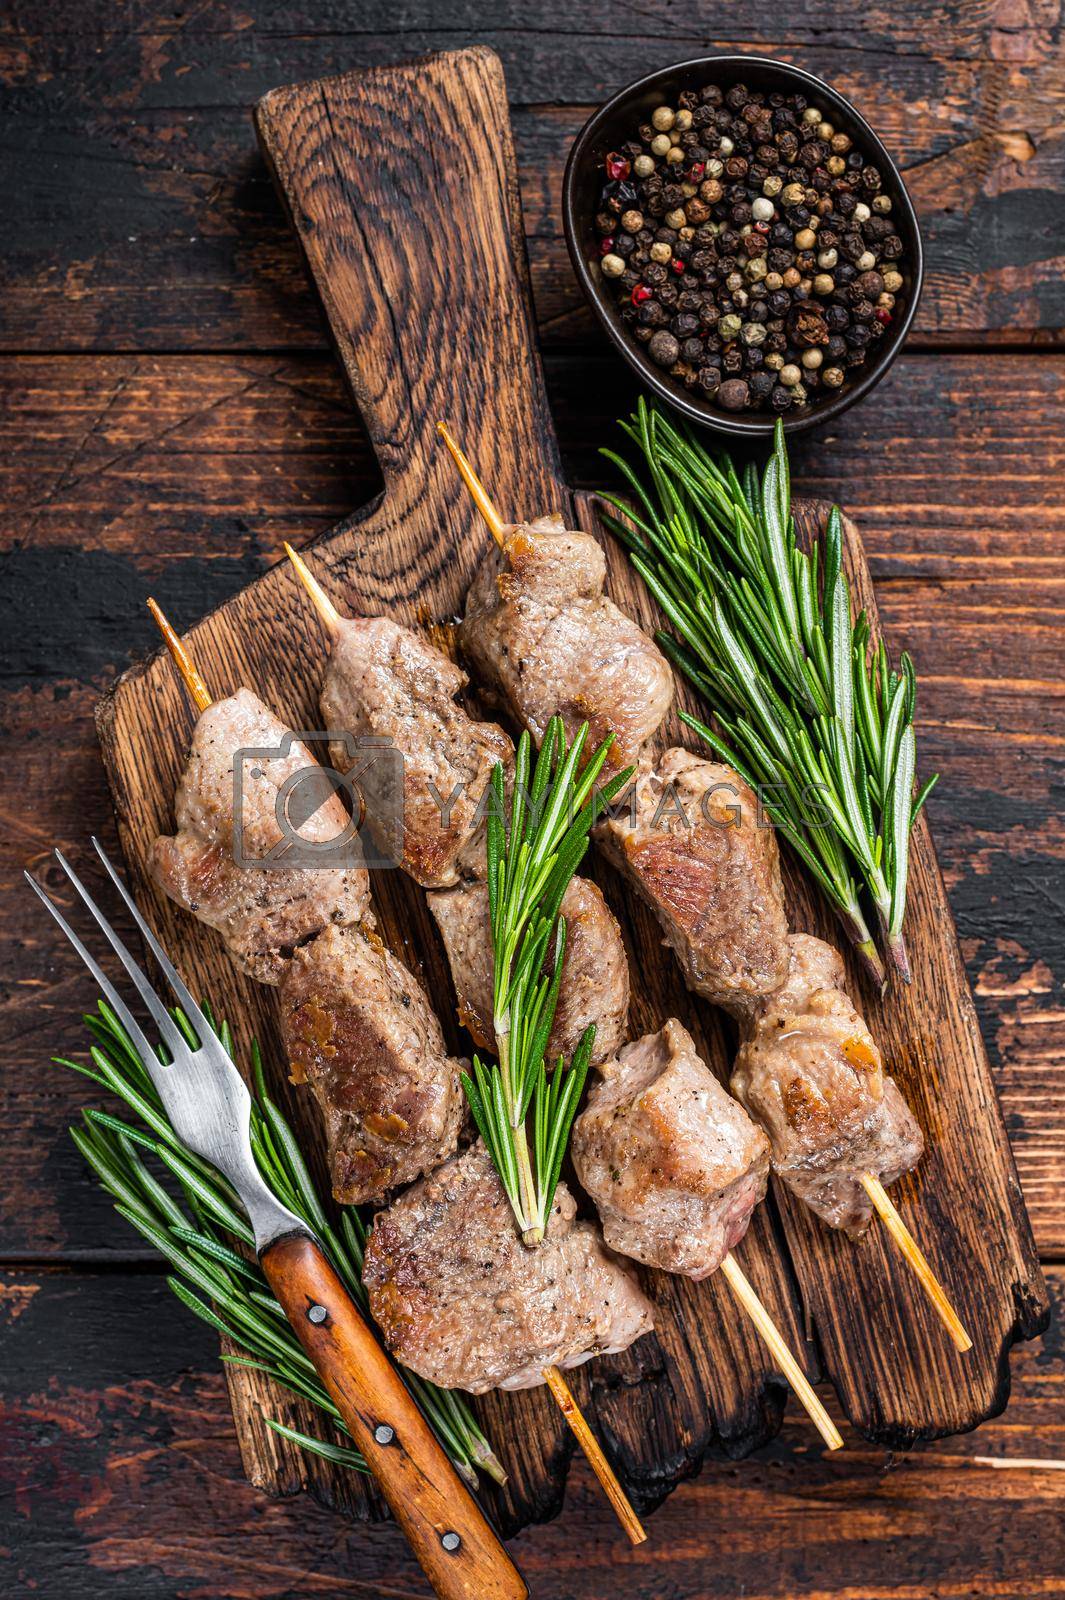 Royalty free image of Pork meat Shish kebab on skewers with herbs on a wooden board. Dark wooden background. Top view by Composter